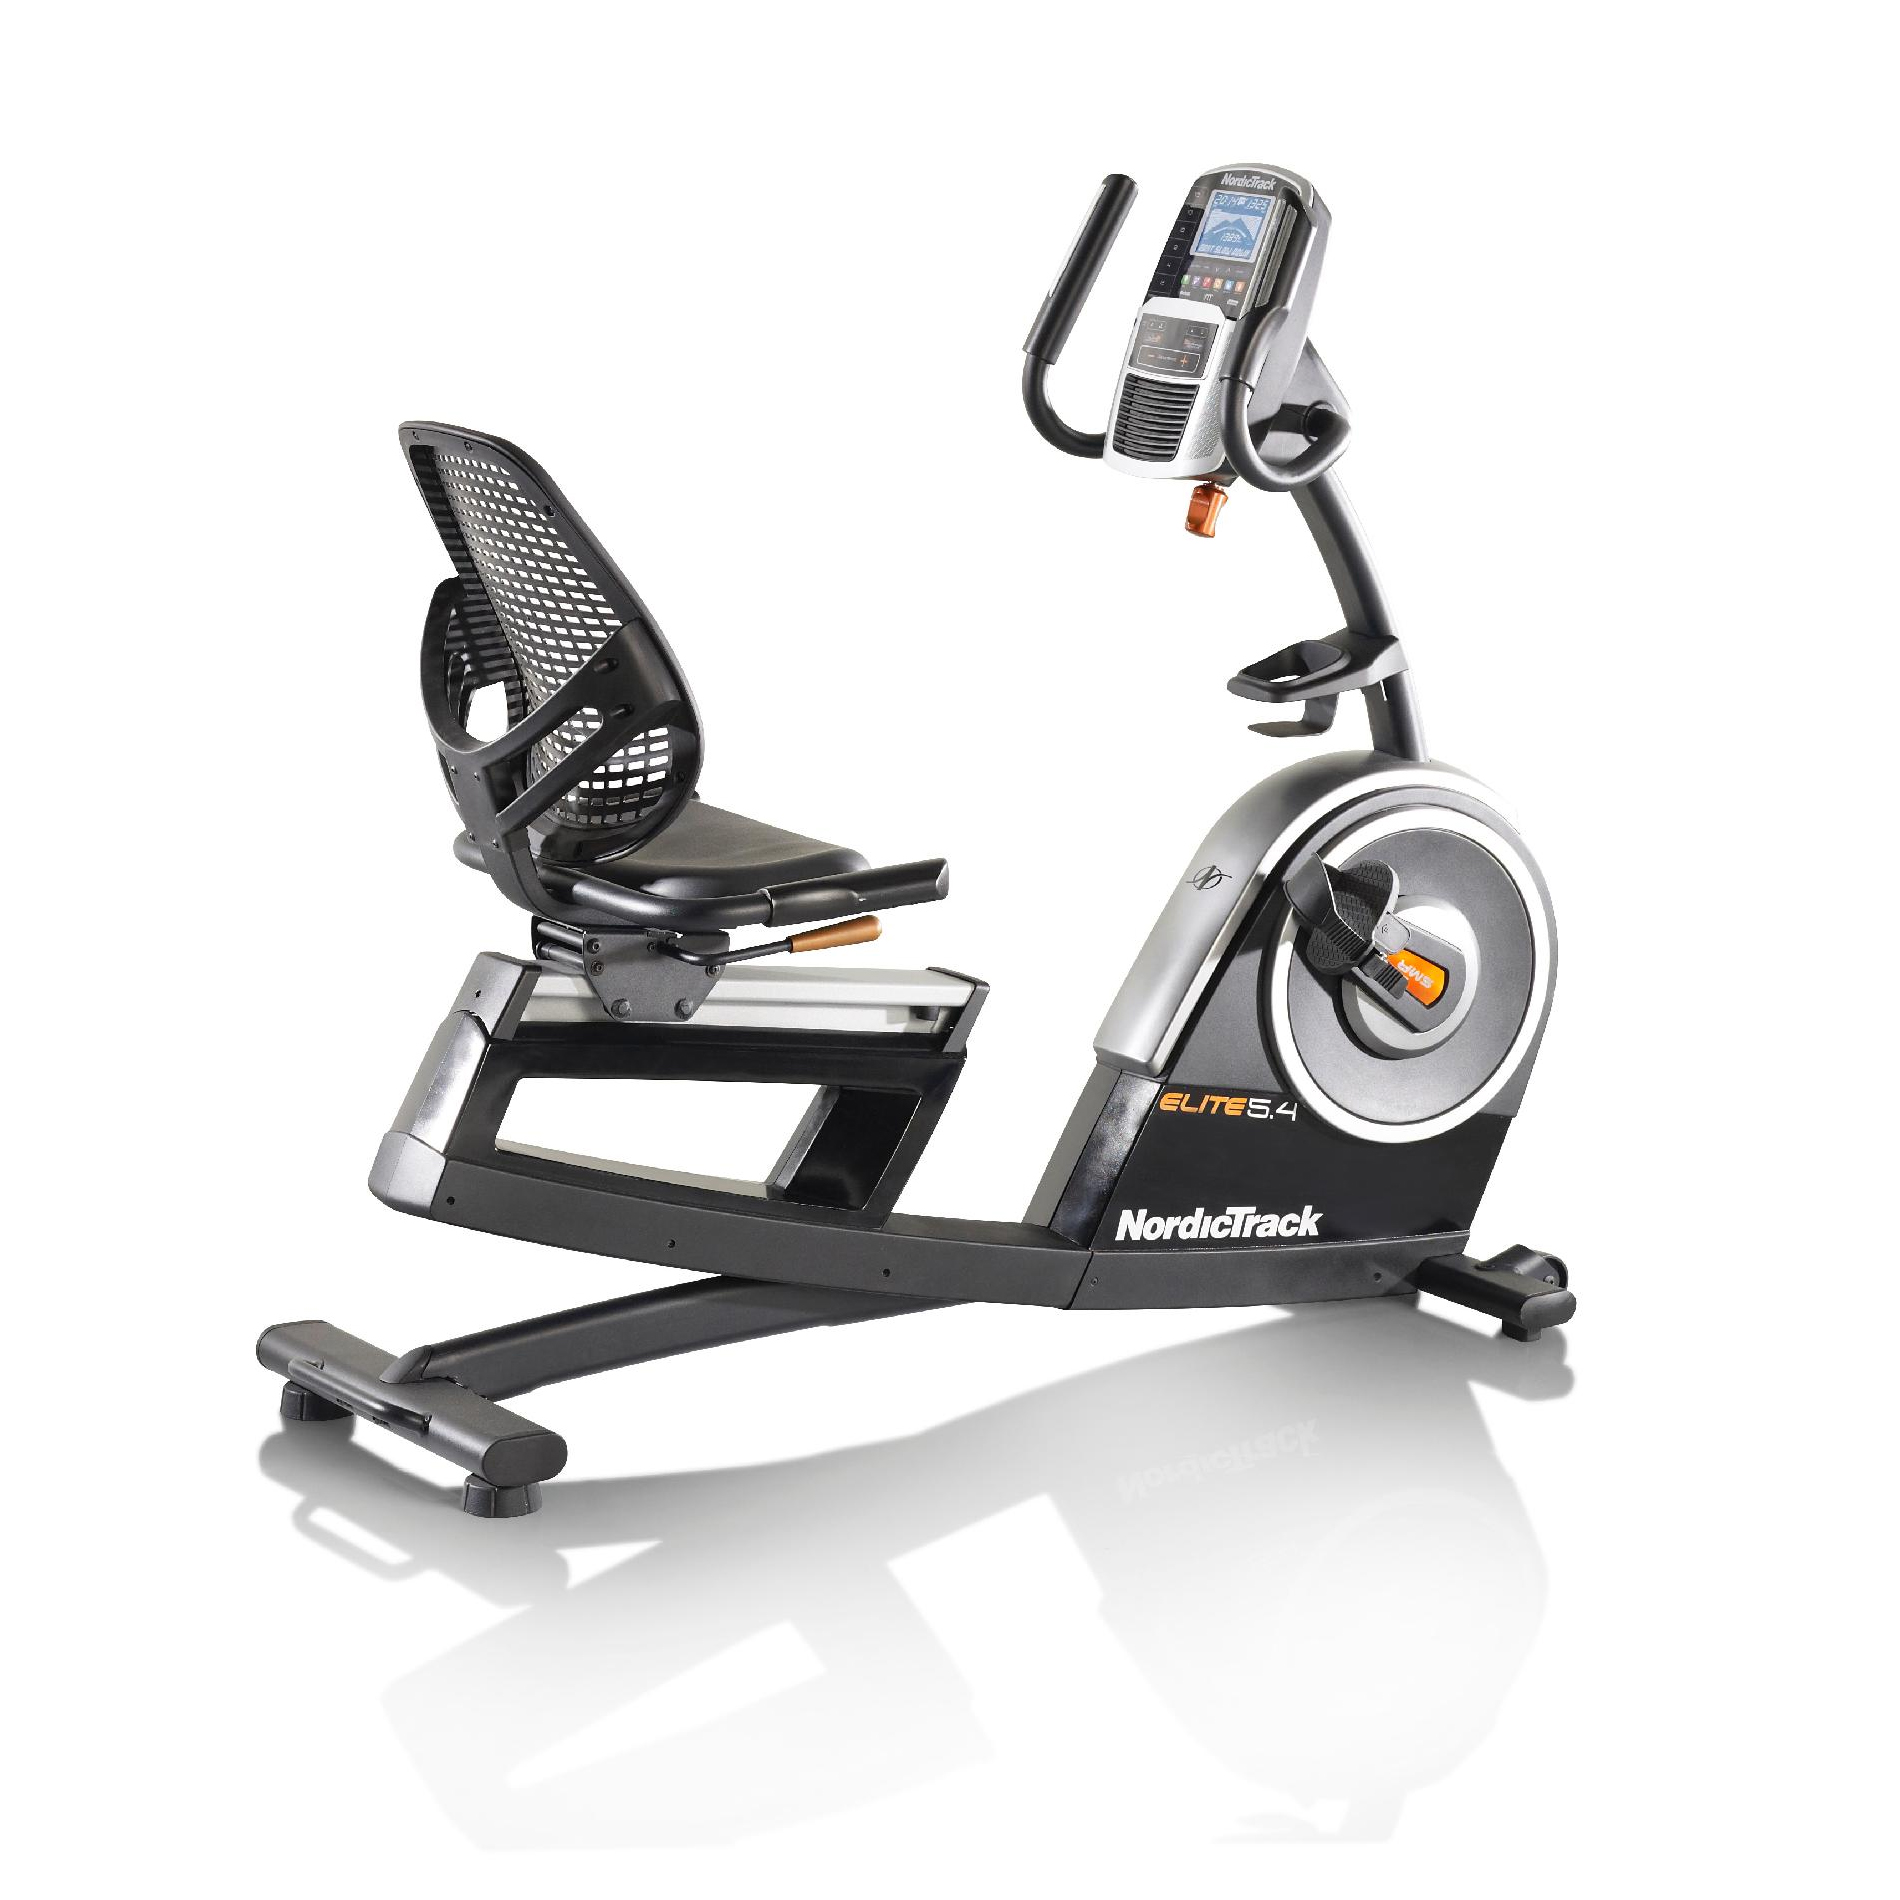 NordicTrack Elite 5.4 Recumbent Cycle with iFit Coach 1 YR Membership